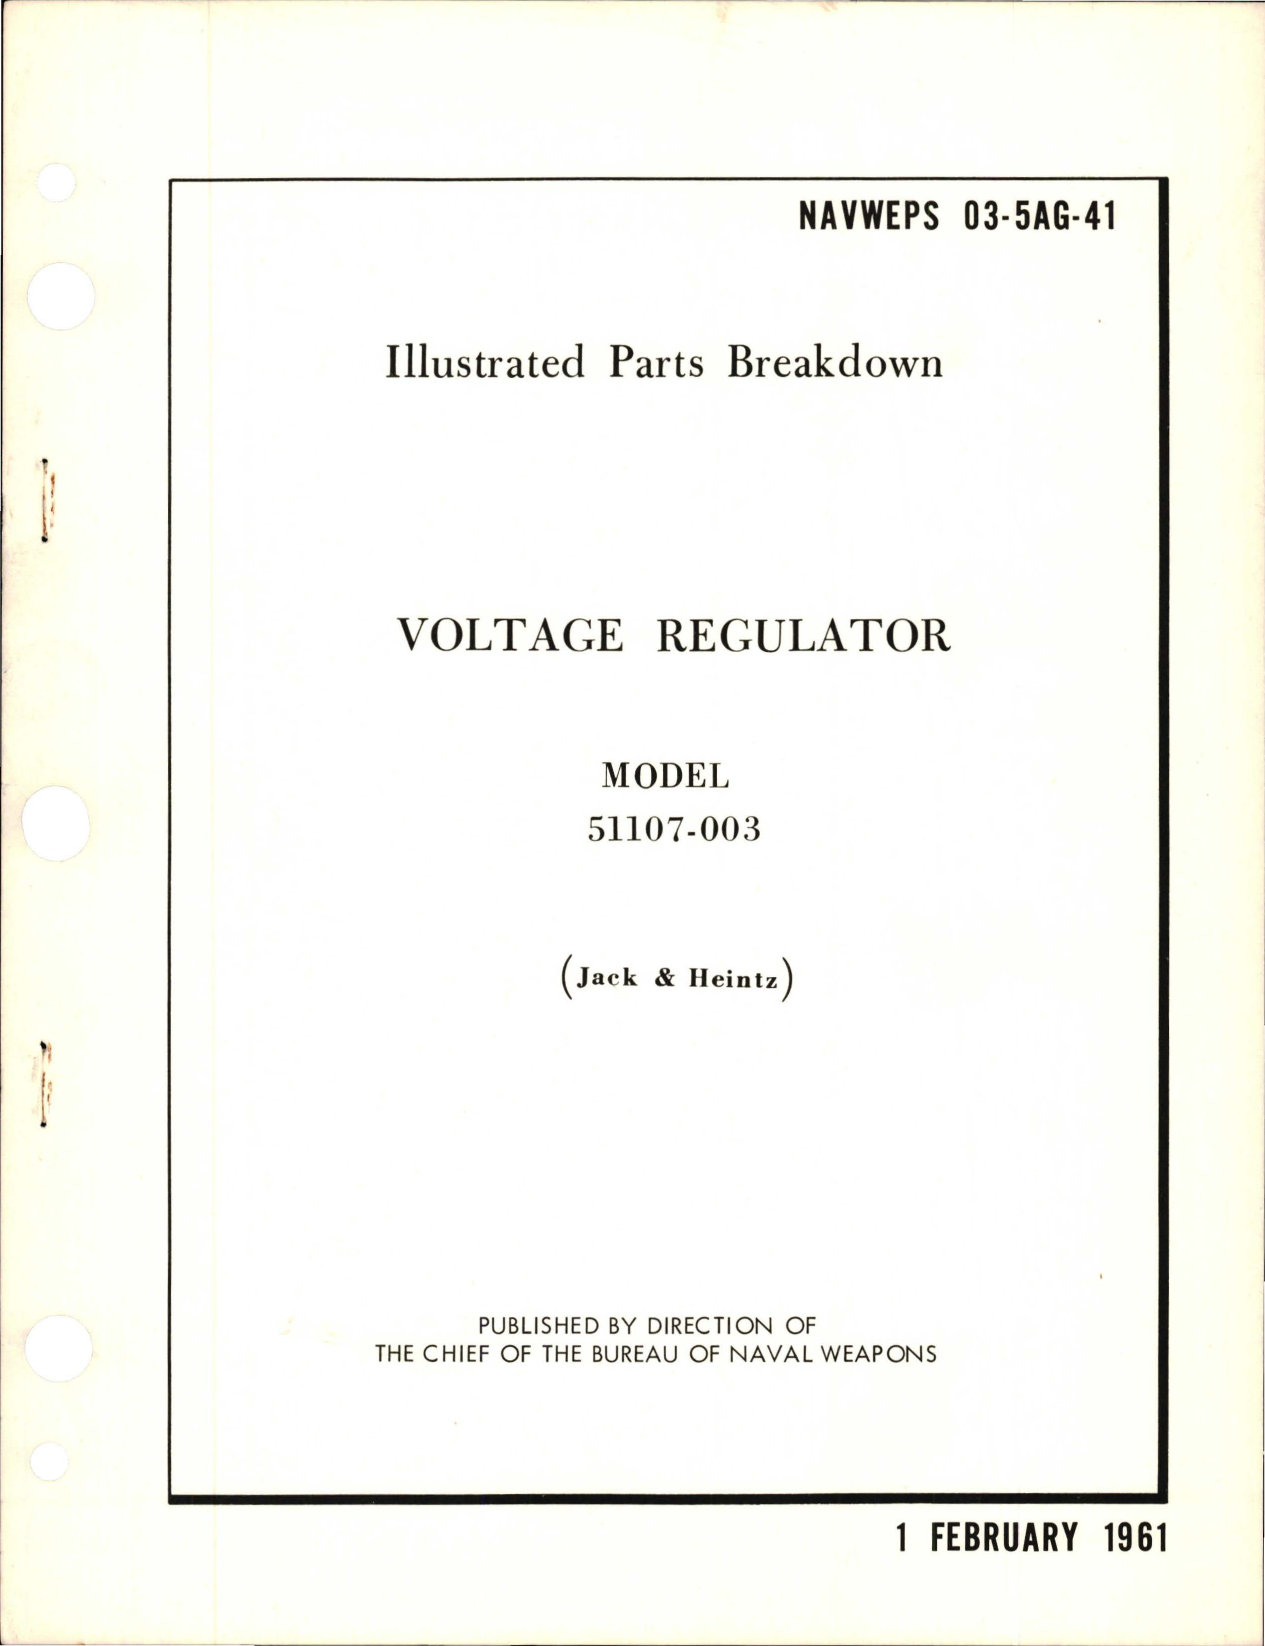 Sample page 1 from AirCorps Library document: Illustrated Parts Breakdown for Voltage Regulator - Model 51107-003